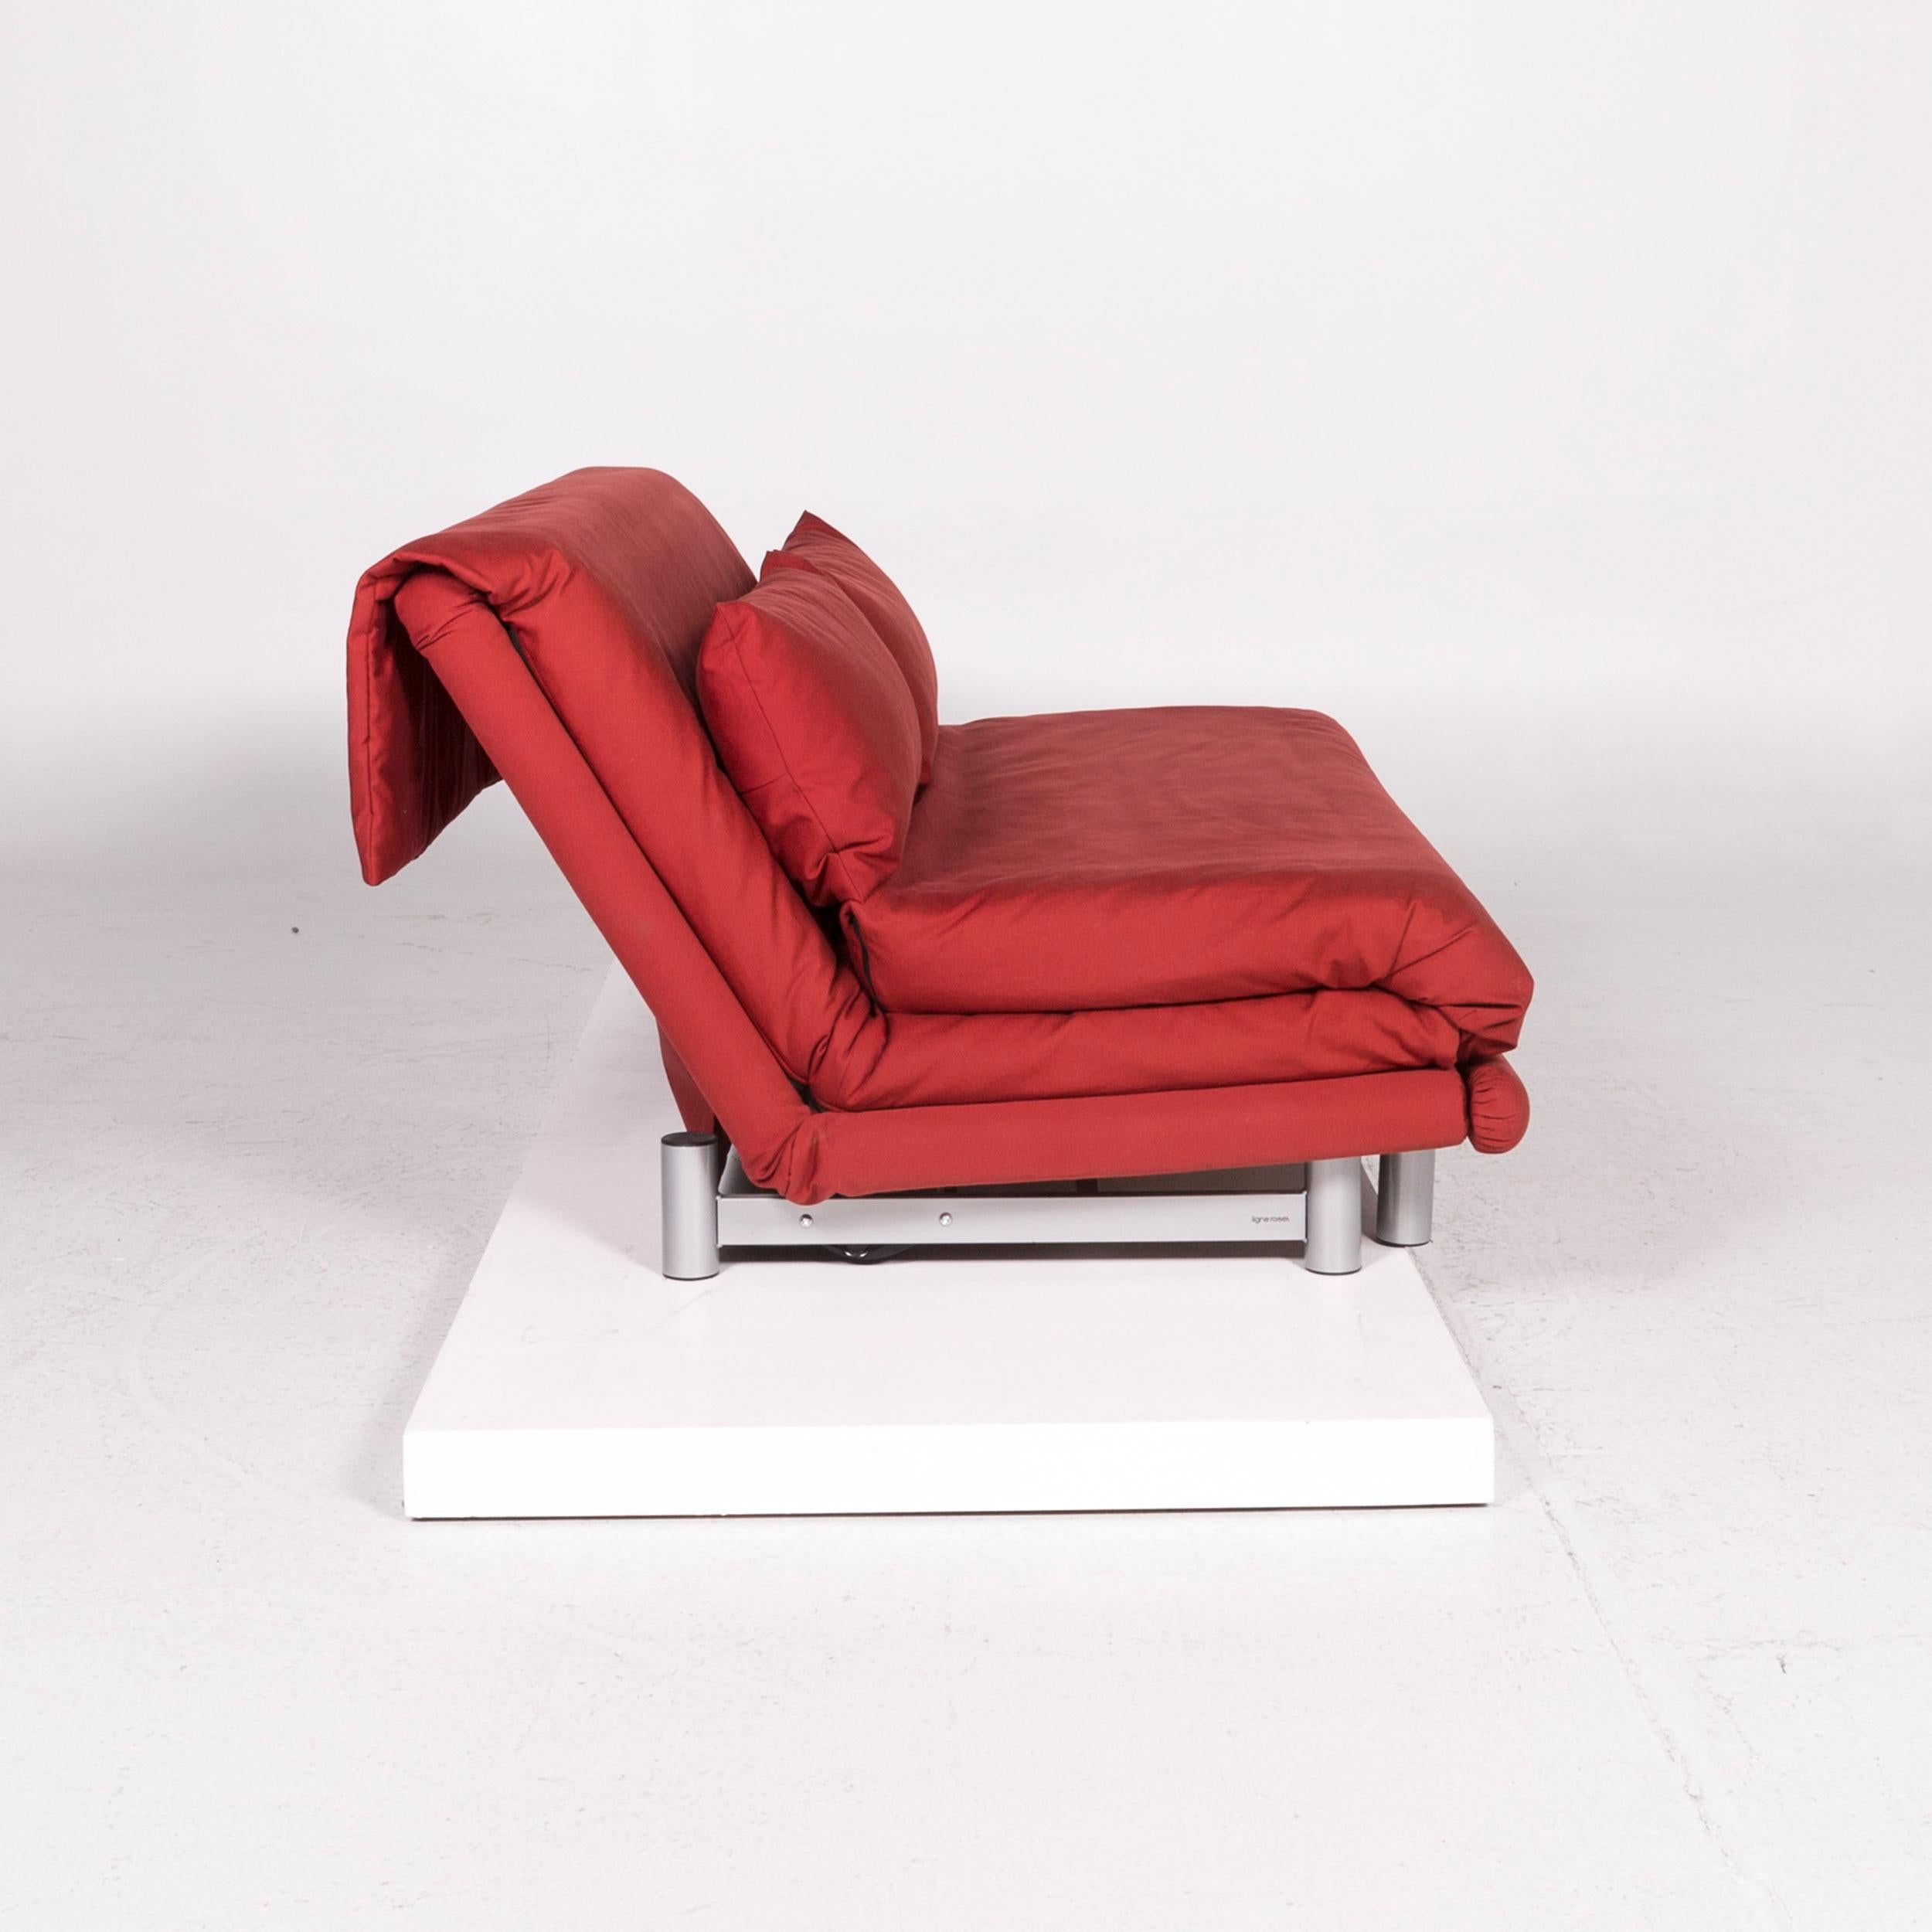 Ligne Roset Multy Fabric Sofa Bed Red Sofa Sleep Function Couch 2